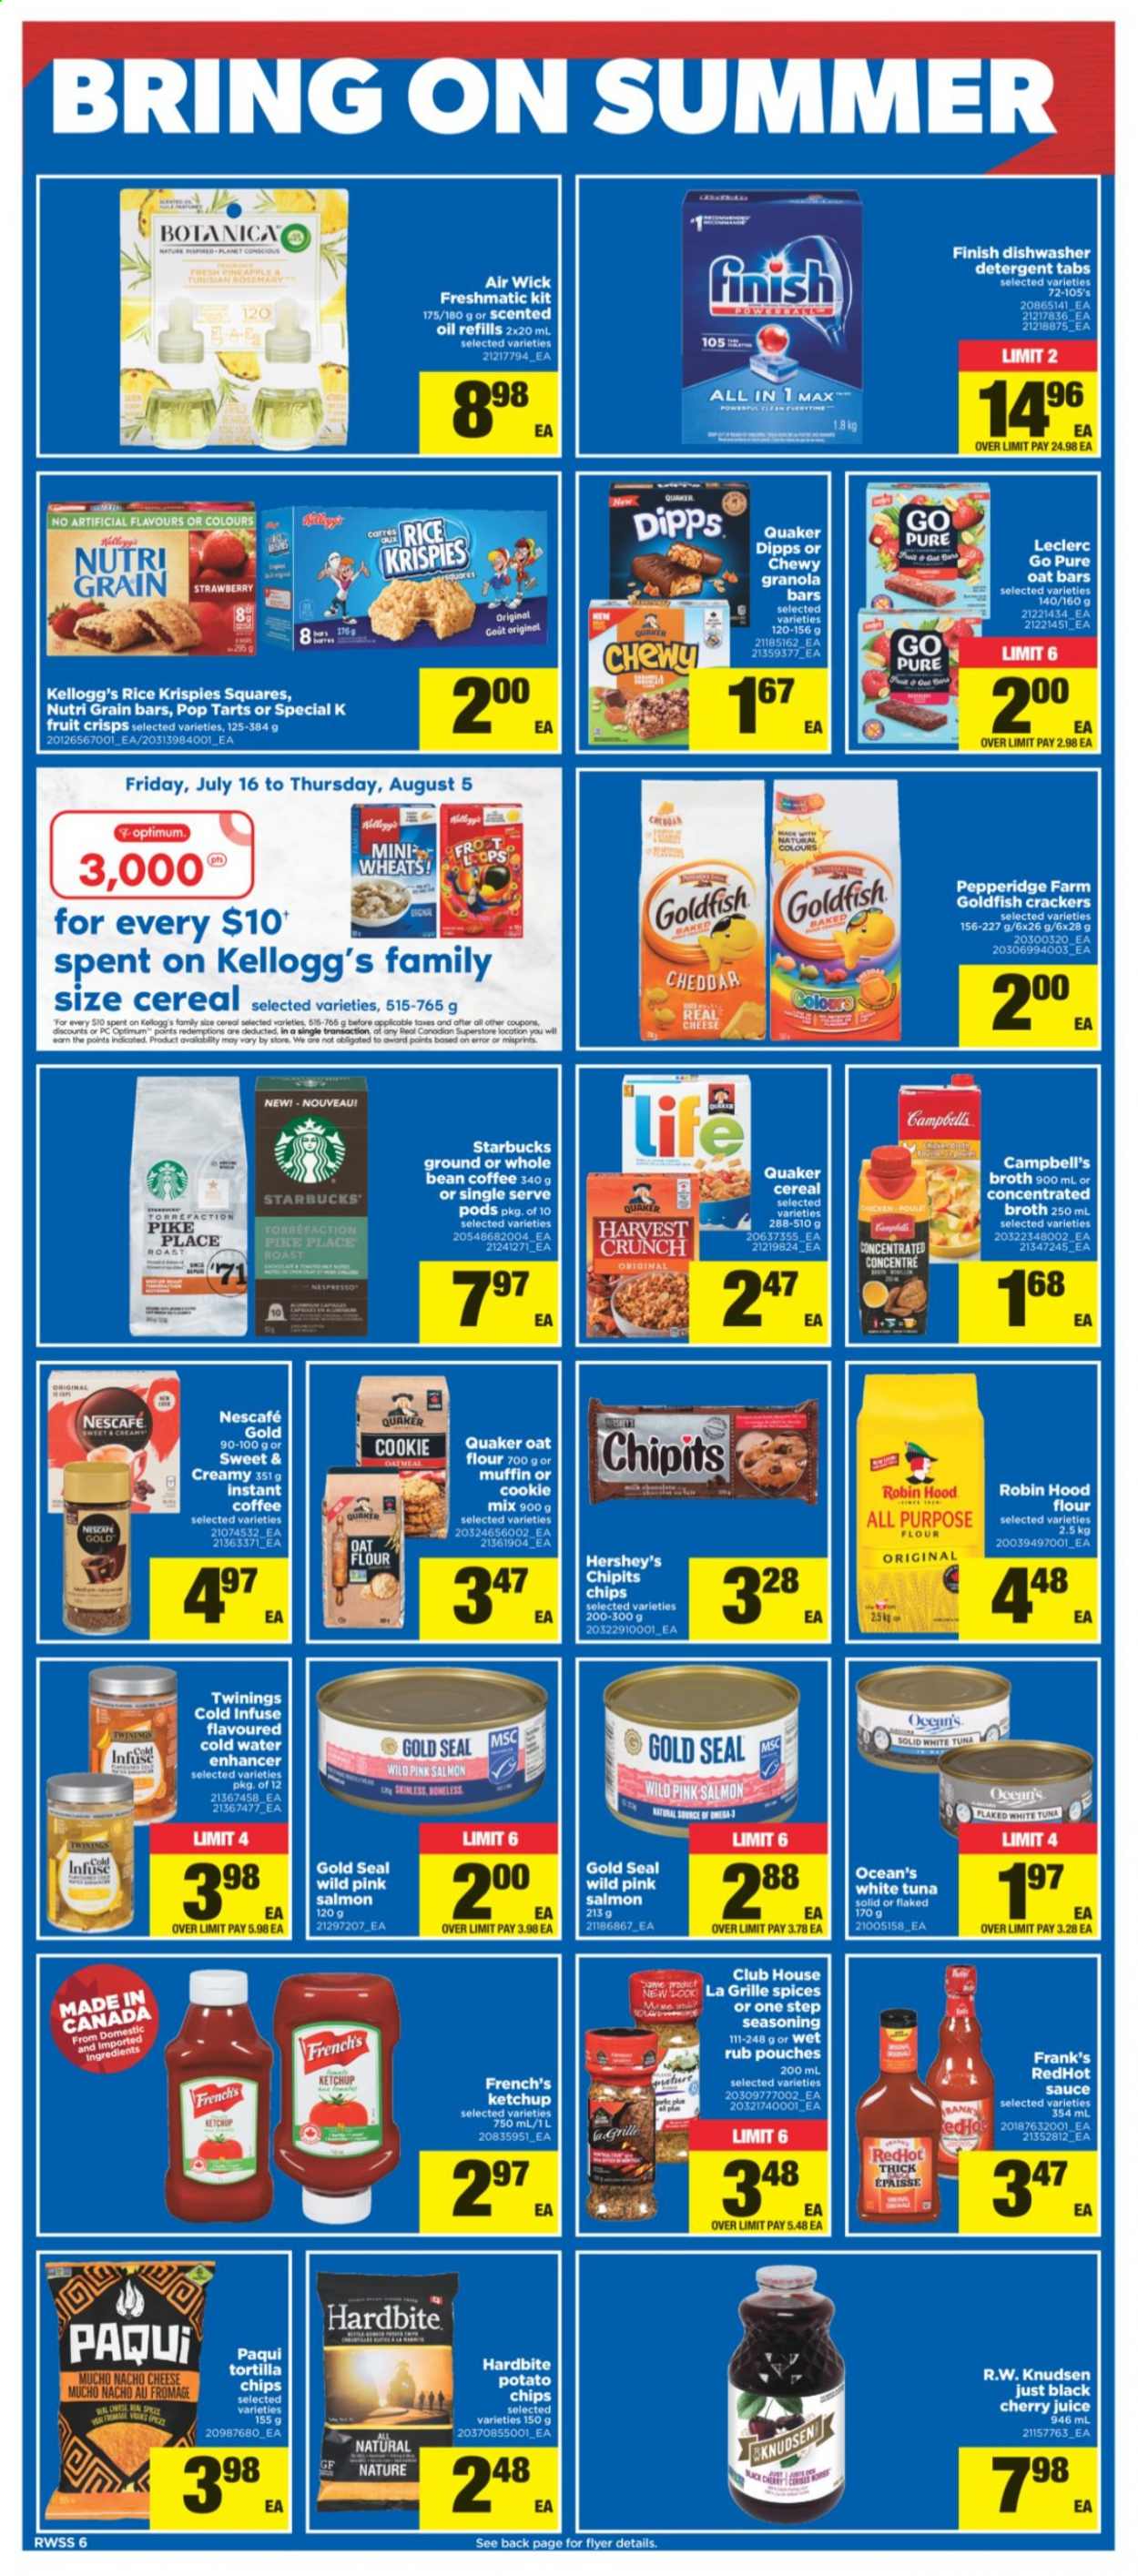 thumbnail - Real Canadian Superstore Flyer - July 23, 2021 - July 29, 2021 - Sales products - tortillas, salmon, tuna, Campbell's, Quaker, cheese, Hershey's, crackers, Kellogg's, Pop-Tarts, potato chips, Goldfish, broth, cereals, granola bar, Rice Krispies, Nutri-Grain, spice, oil, cherry juice, juice, Twinings, instant coffee, Starbucks, Air Wick, scented oil, chips, Nescafé. Page 6.